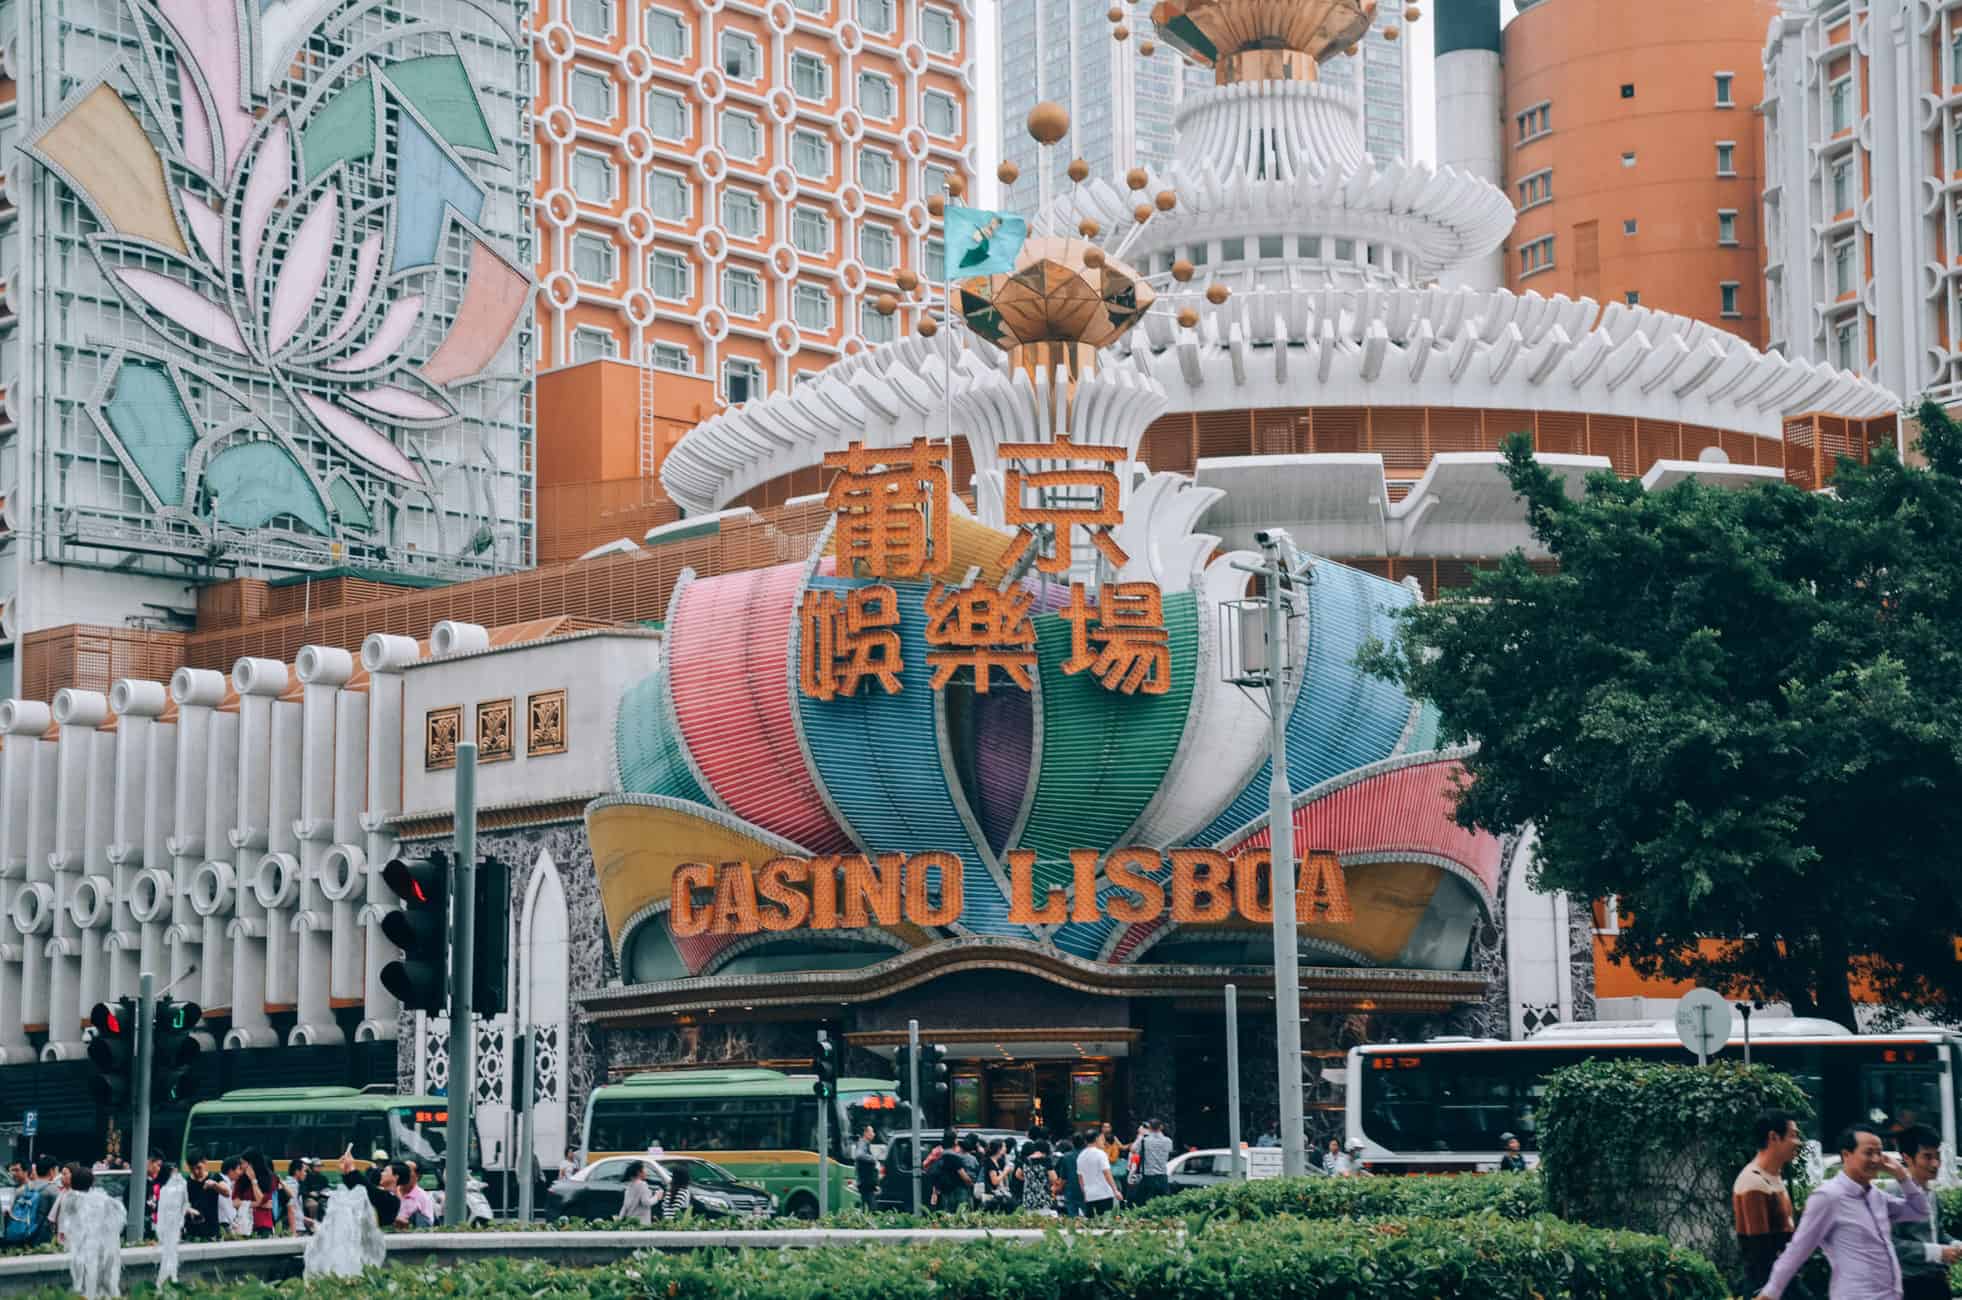 Macau In One Day: The Best Things To See and Do